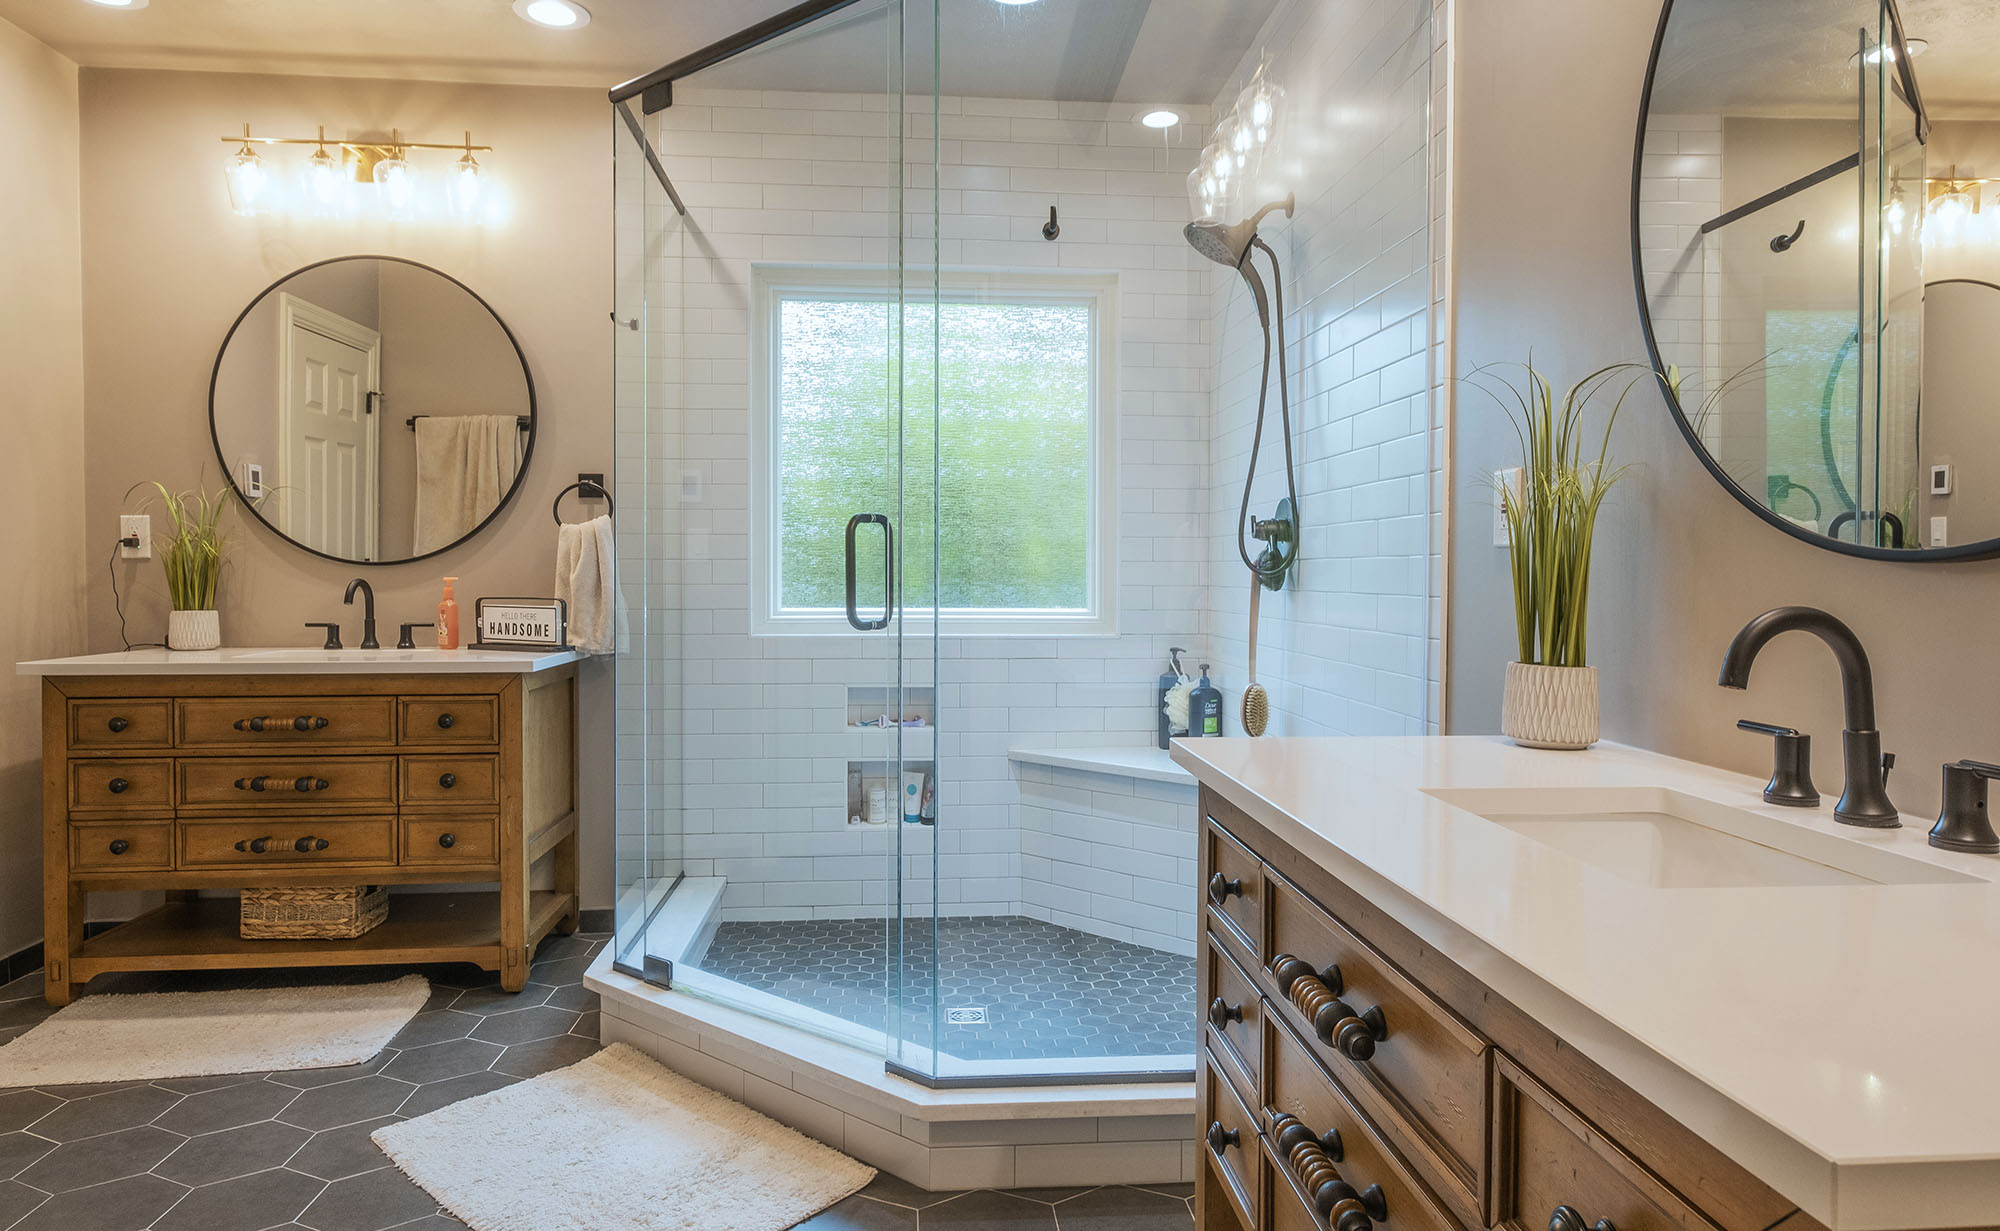 Large walk-in corner shower with bench seating, glass shower doors with white subway tile. Two large furniture styled vanities and octagonal tiled floor.